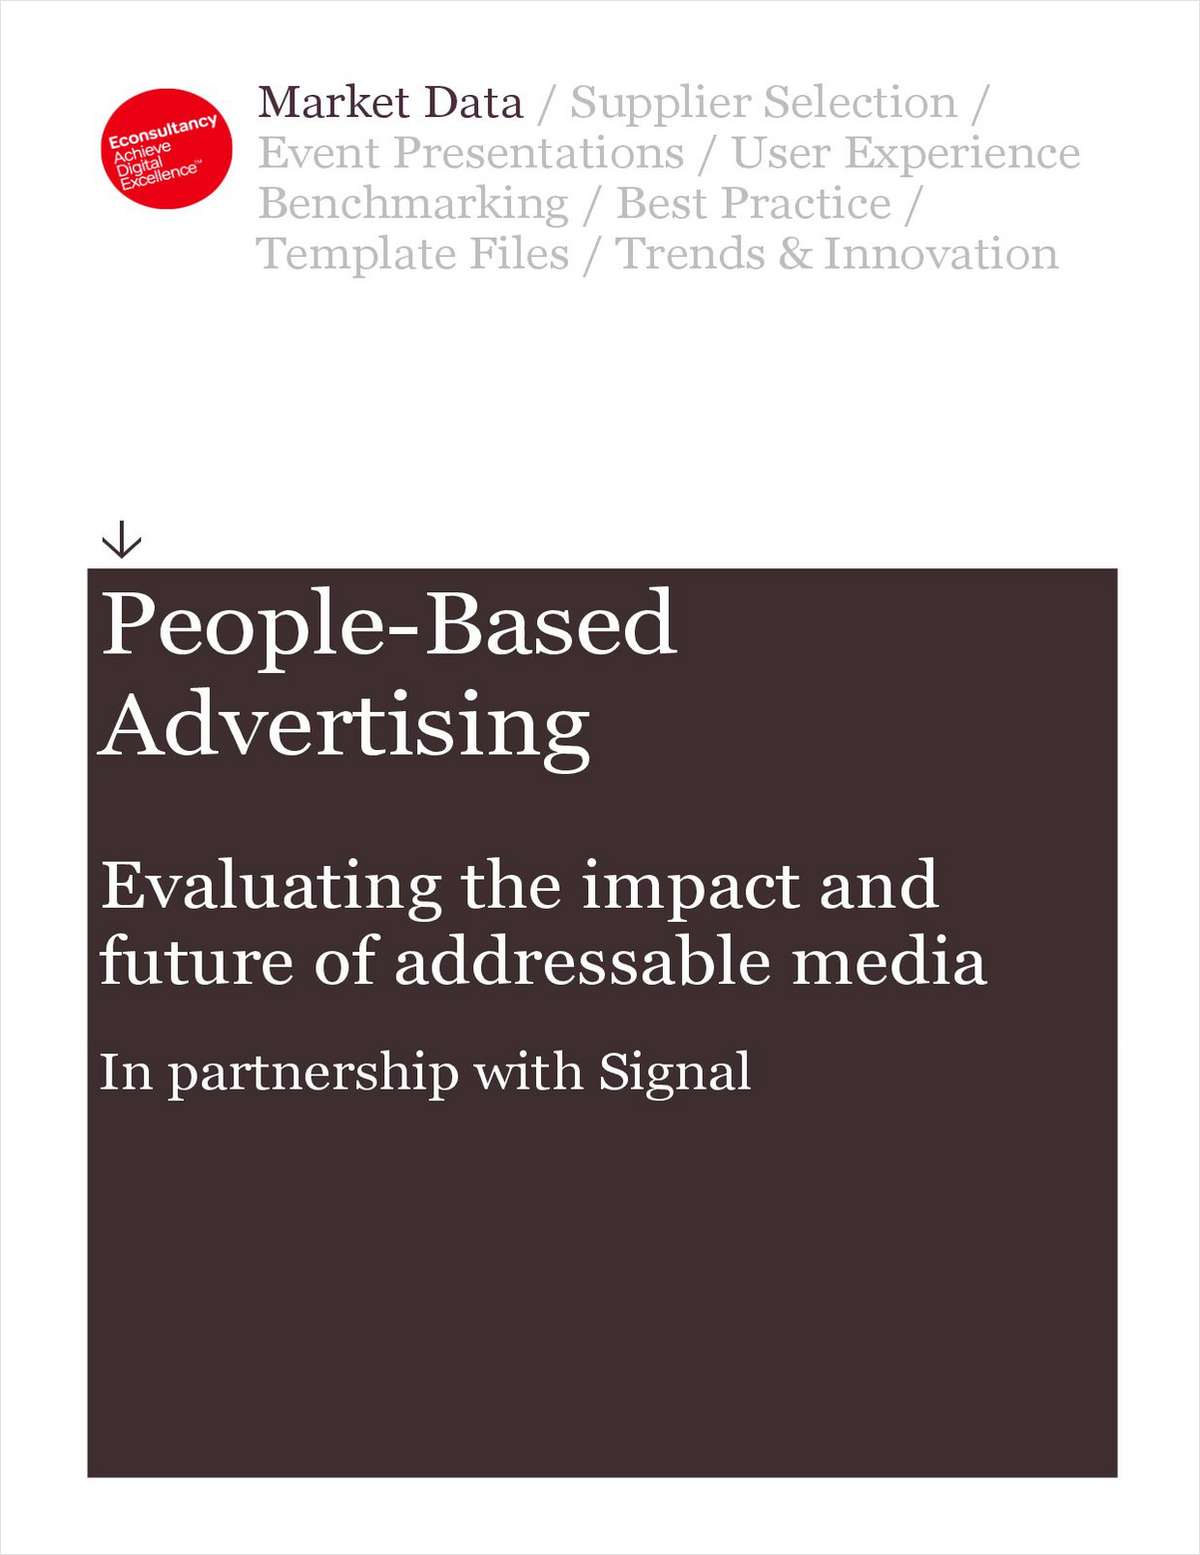 Learn Why 83% of Advertisers Are Reporting Superior Outcomes With People-Based Ads